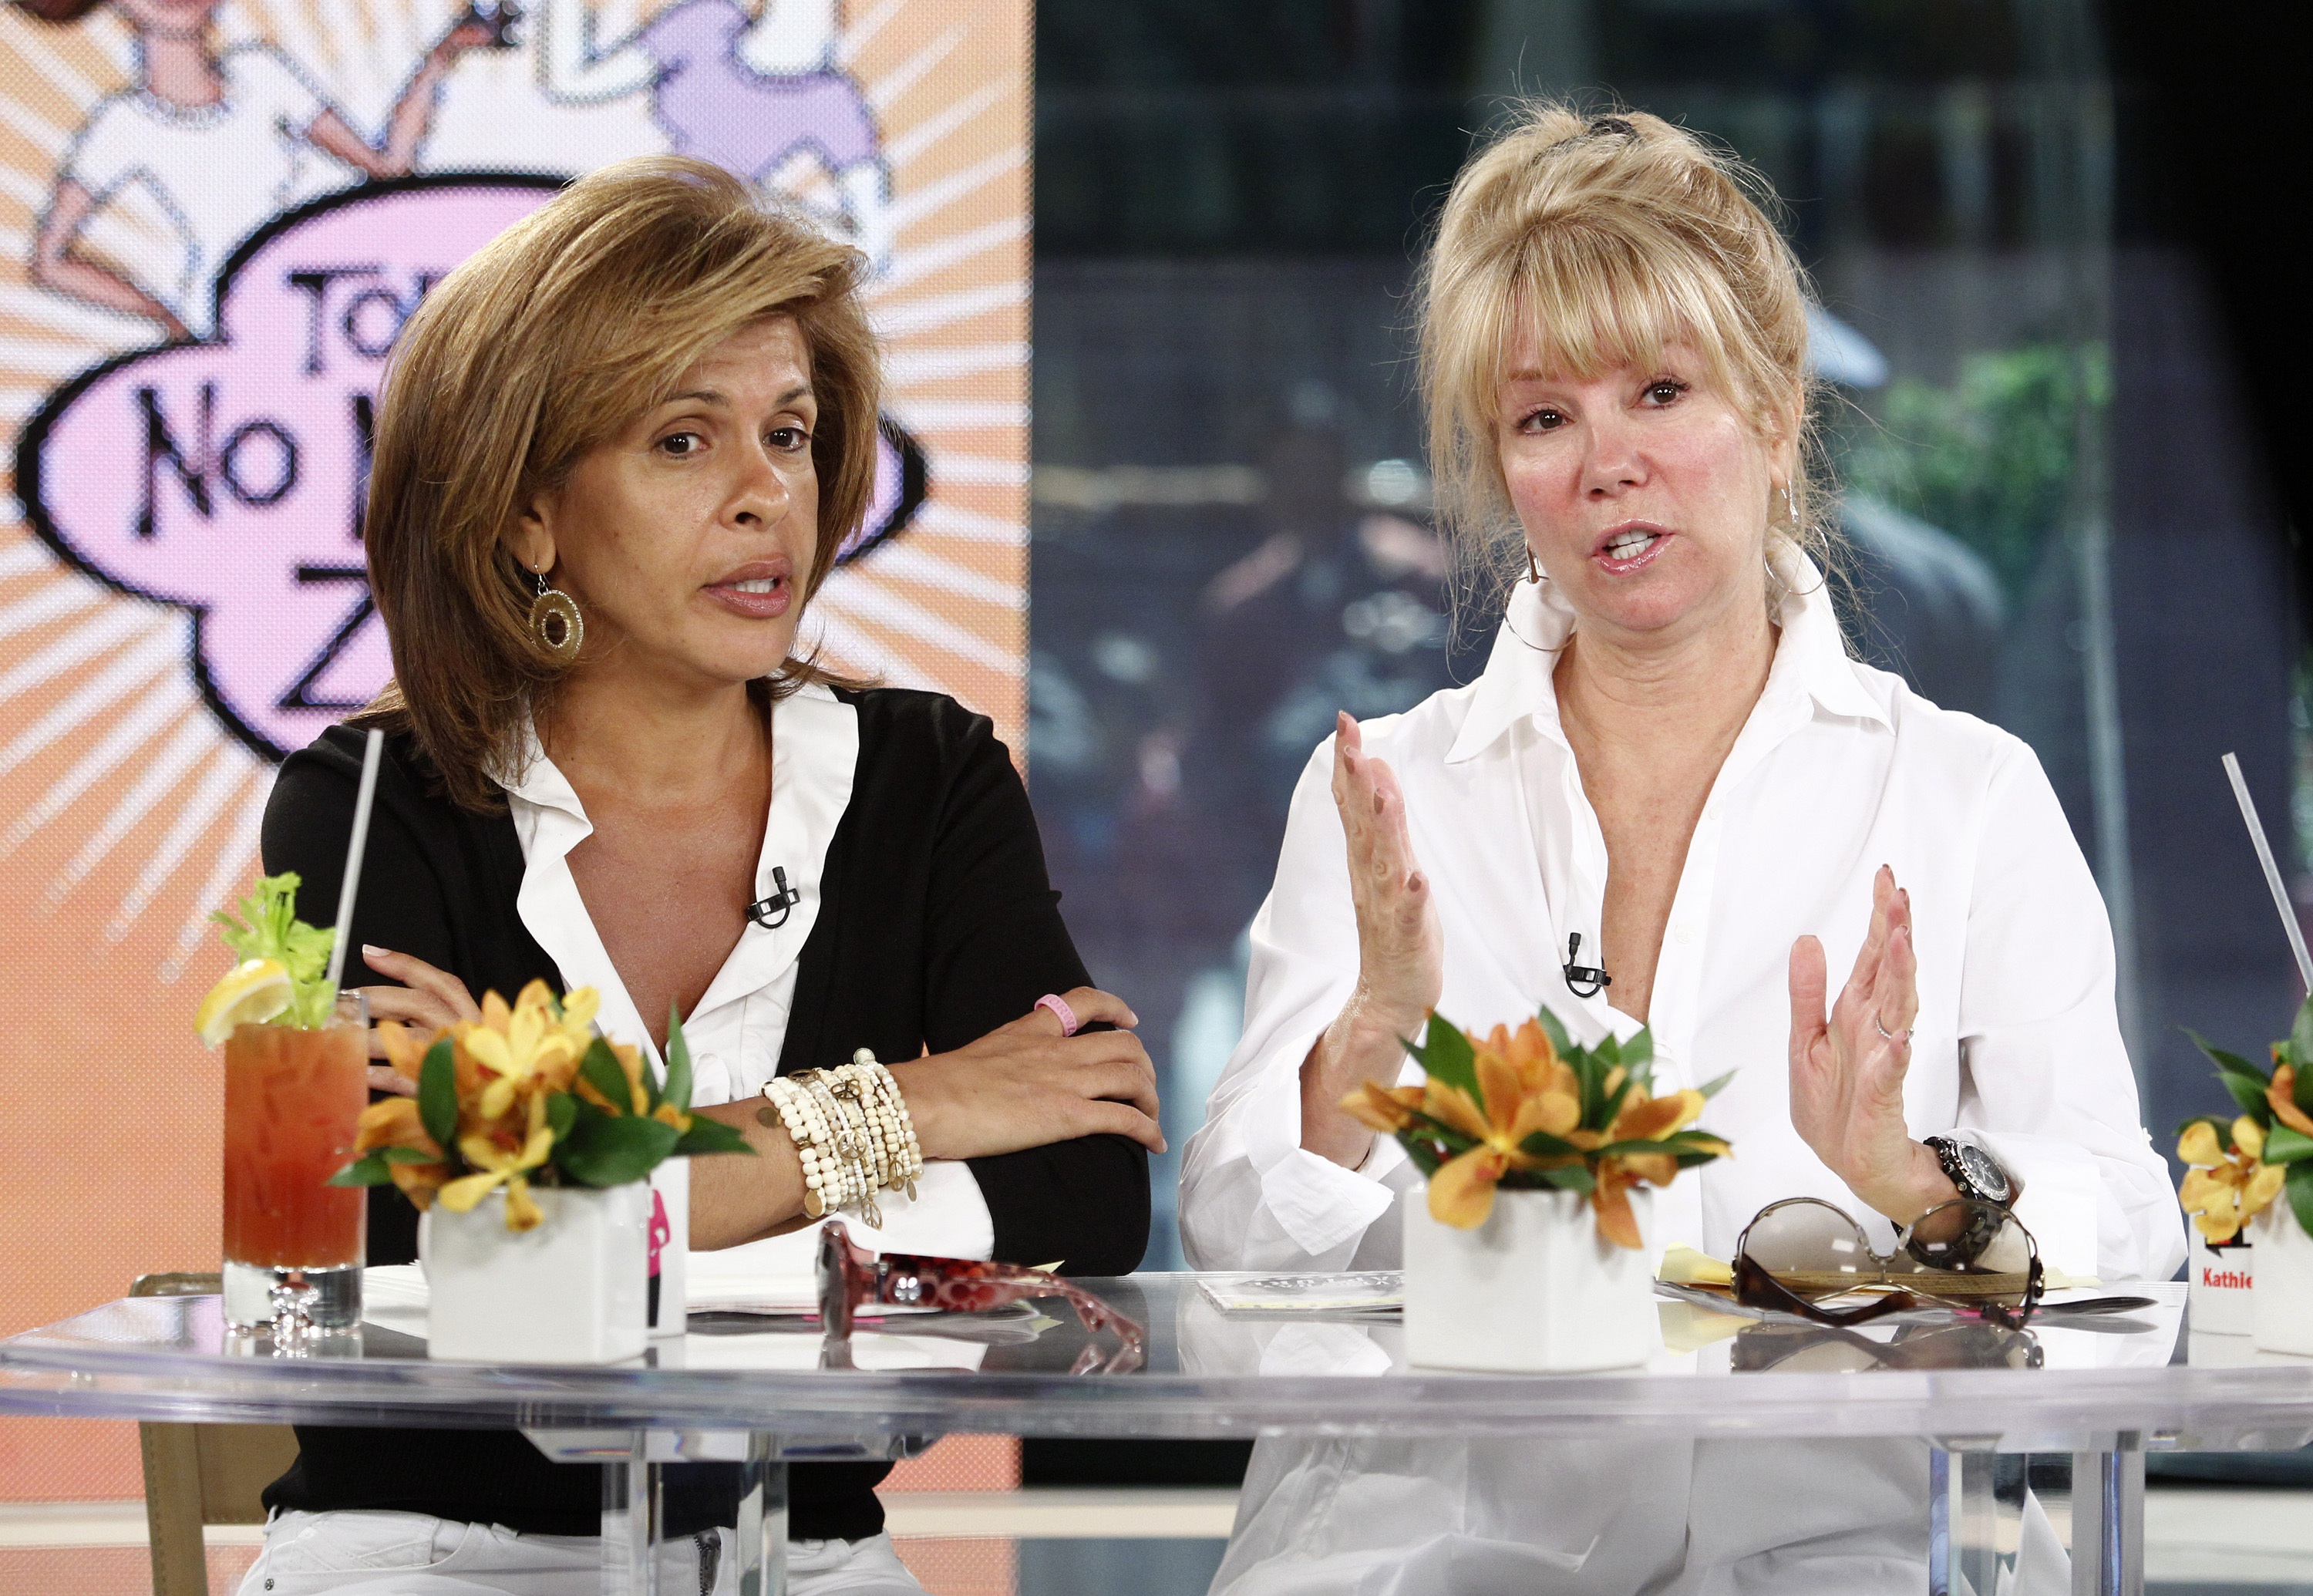 Hoda Kotb and Kathie Lee Gifford appear on NBC News' "Today" show on May 13, 2010 | Source: Getty Images